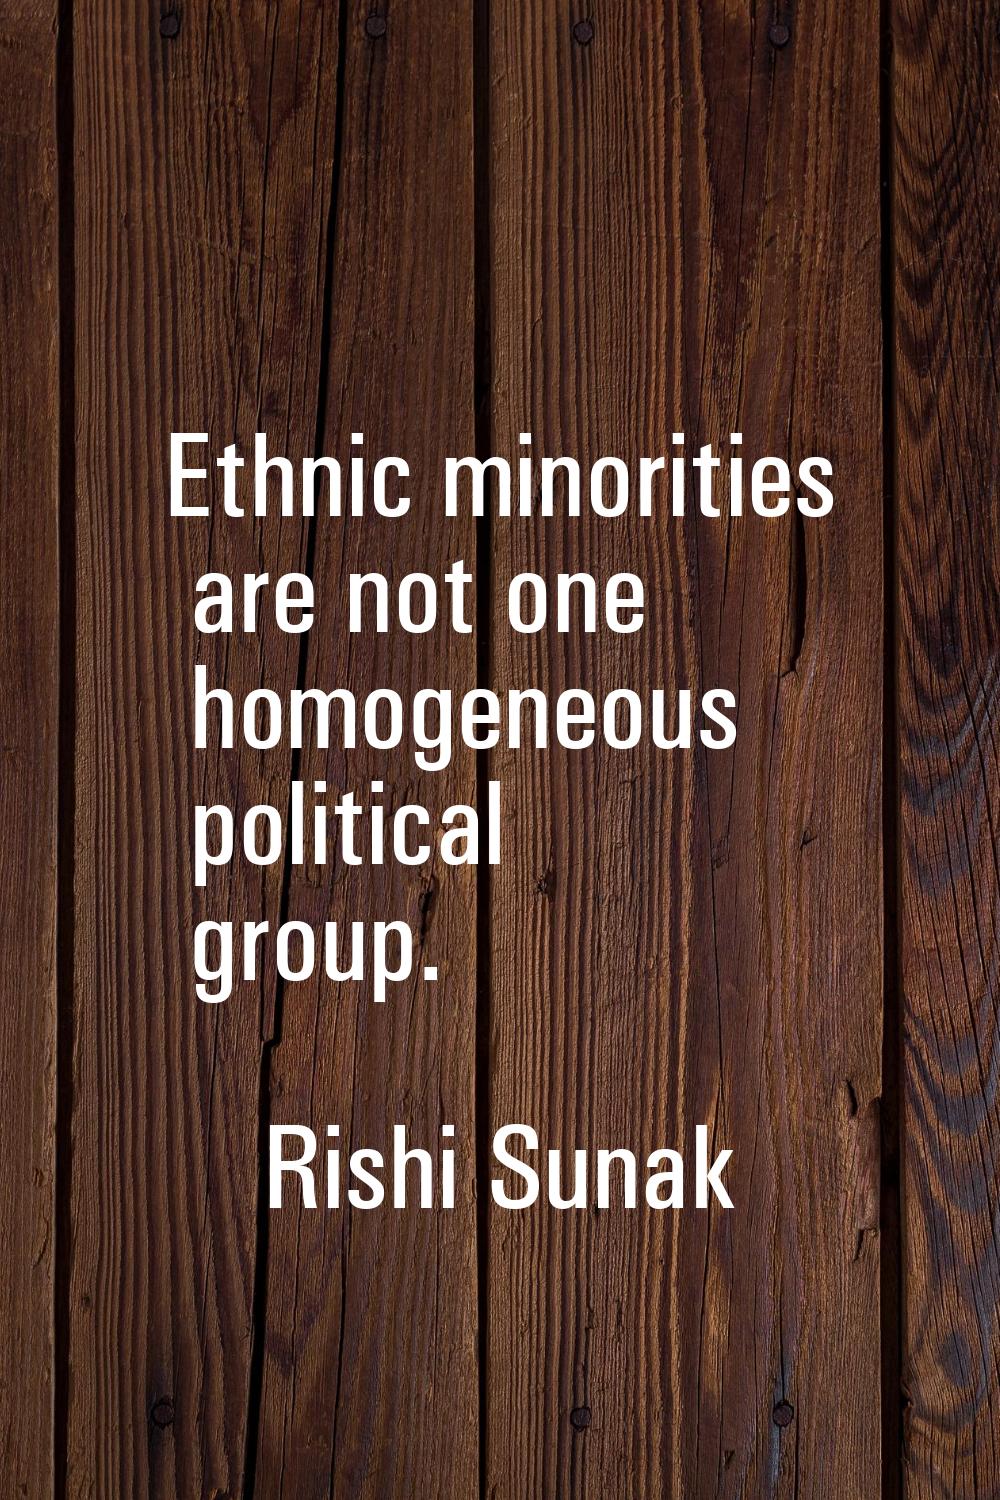 Ethnic minorities are not one homogeneous political group.